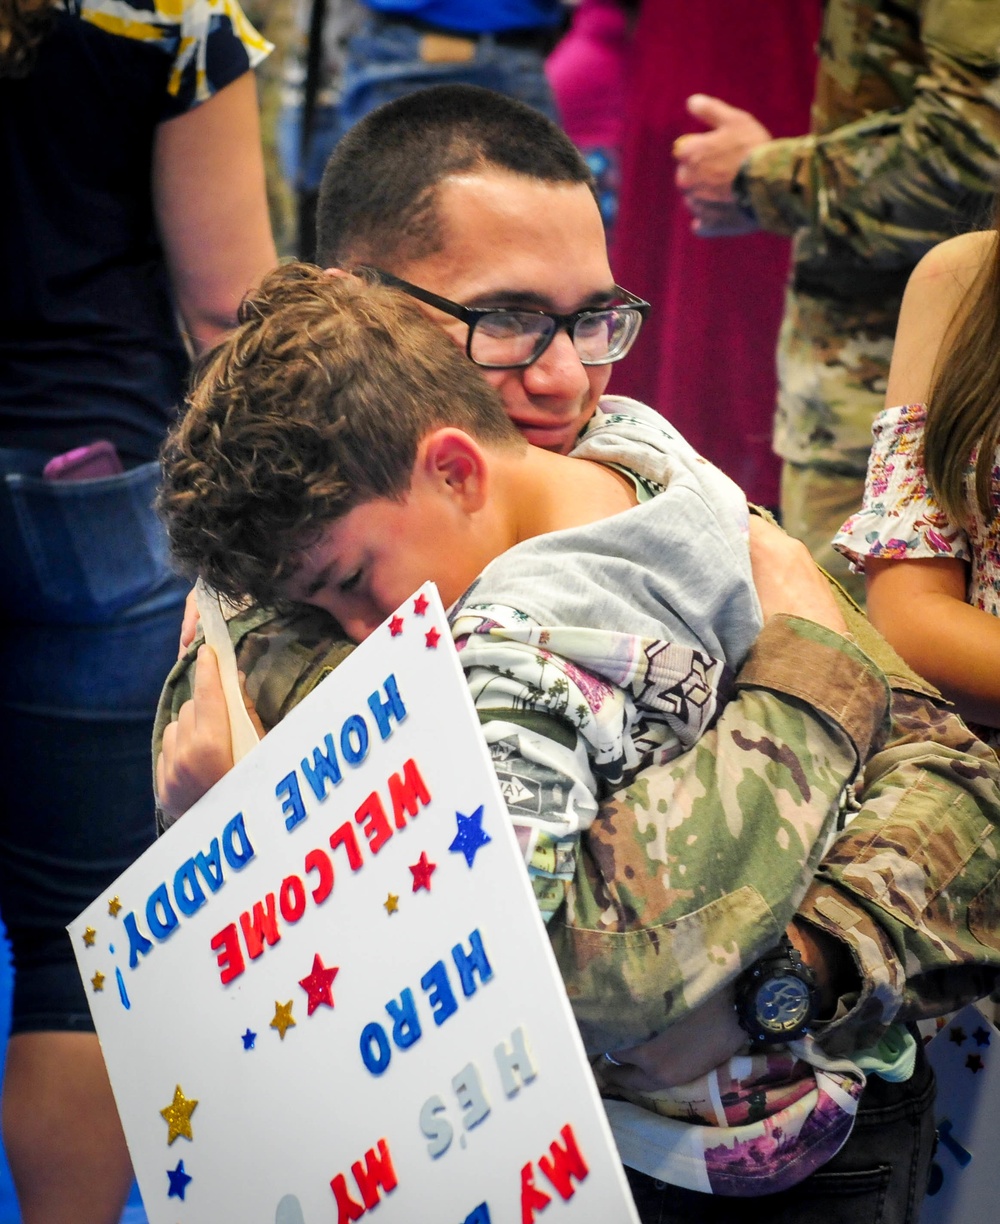 Human Resource Soldiers return to Hawaii from 9 month deployment